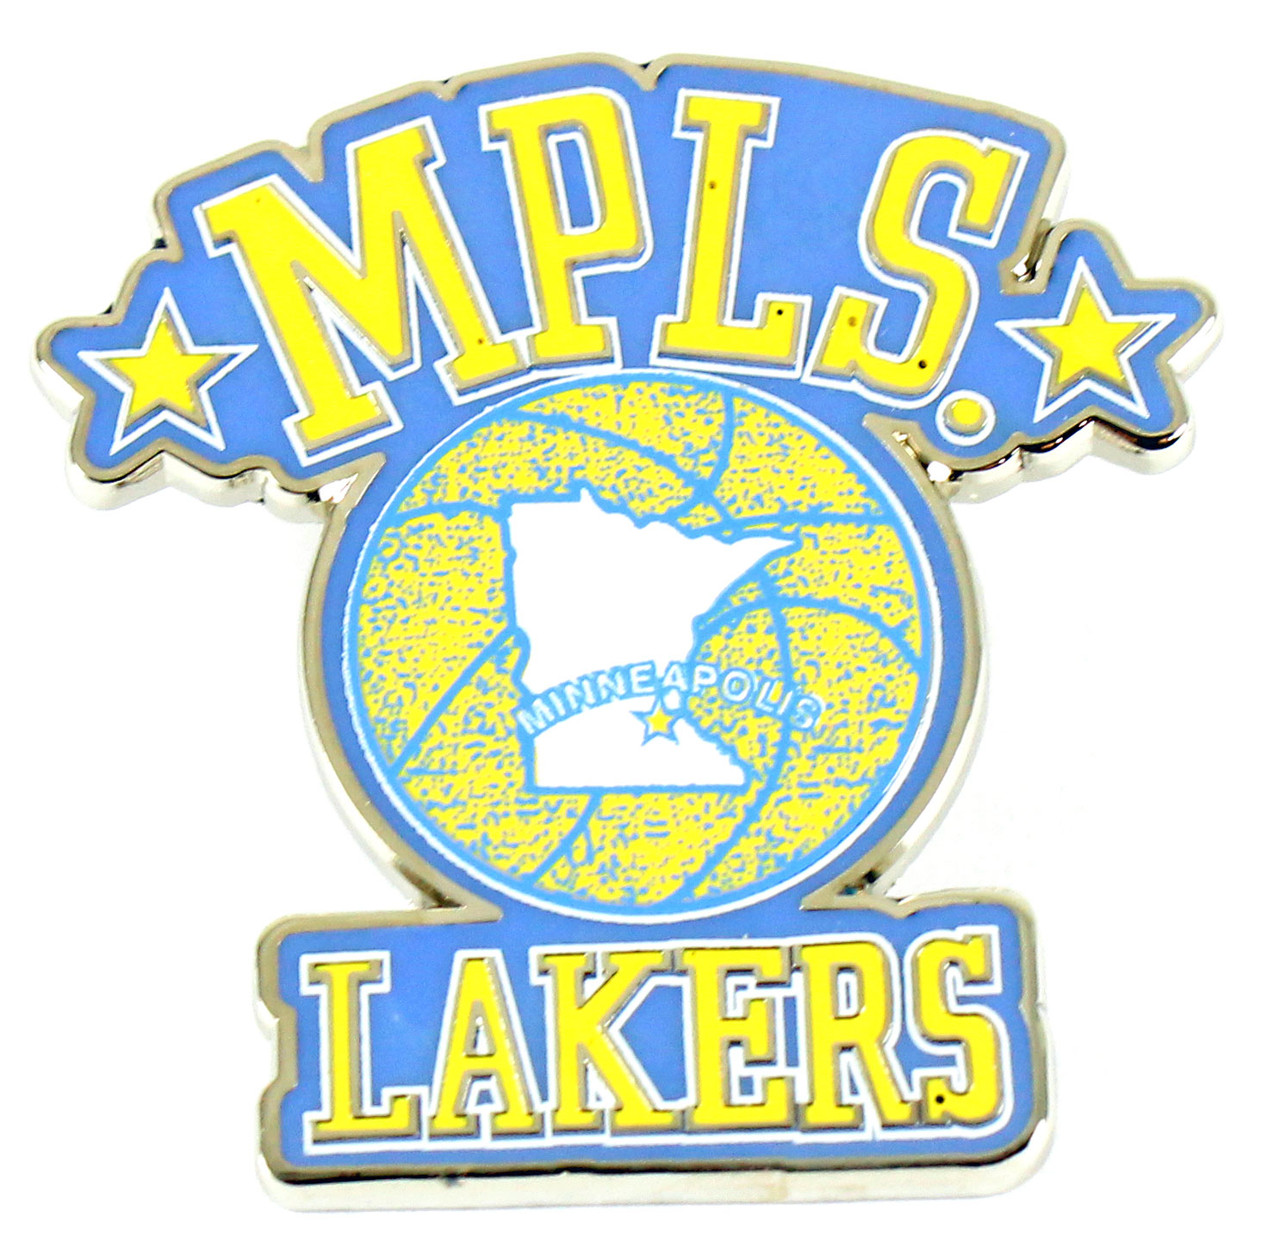 Lakers Classic MPLS Jerseys Photo Gallery